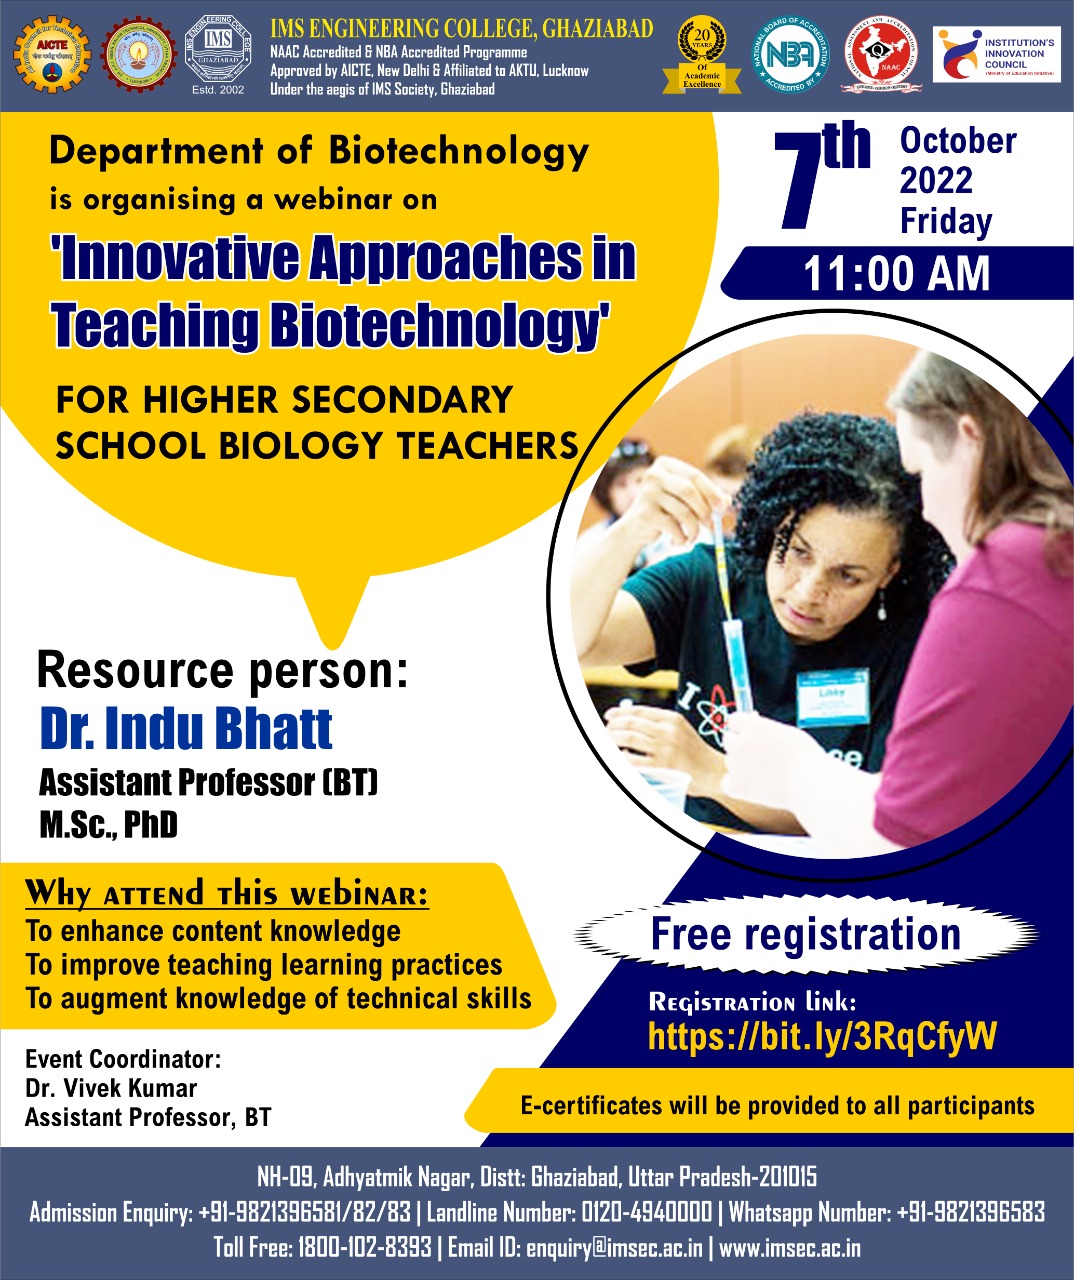 Webinar on Innovative Approaches in Teaching Biotechnology